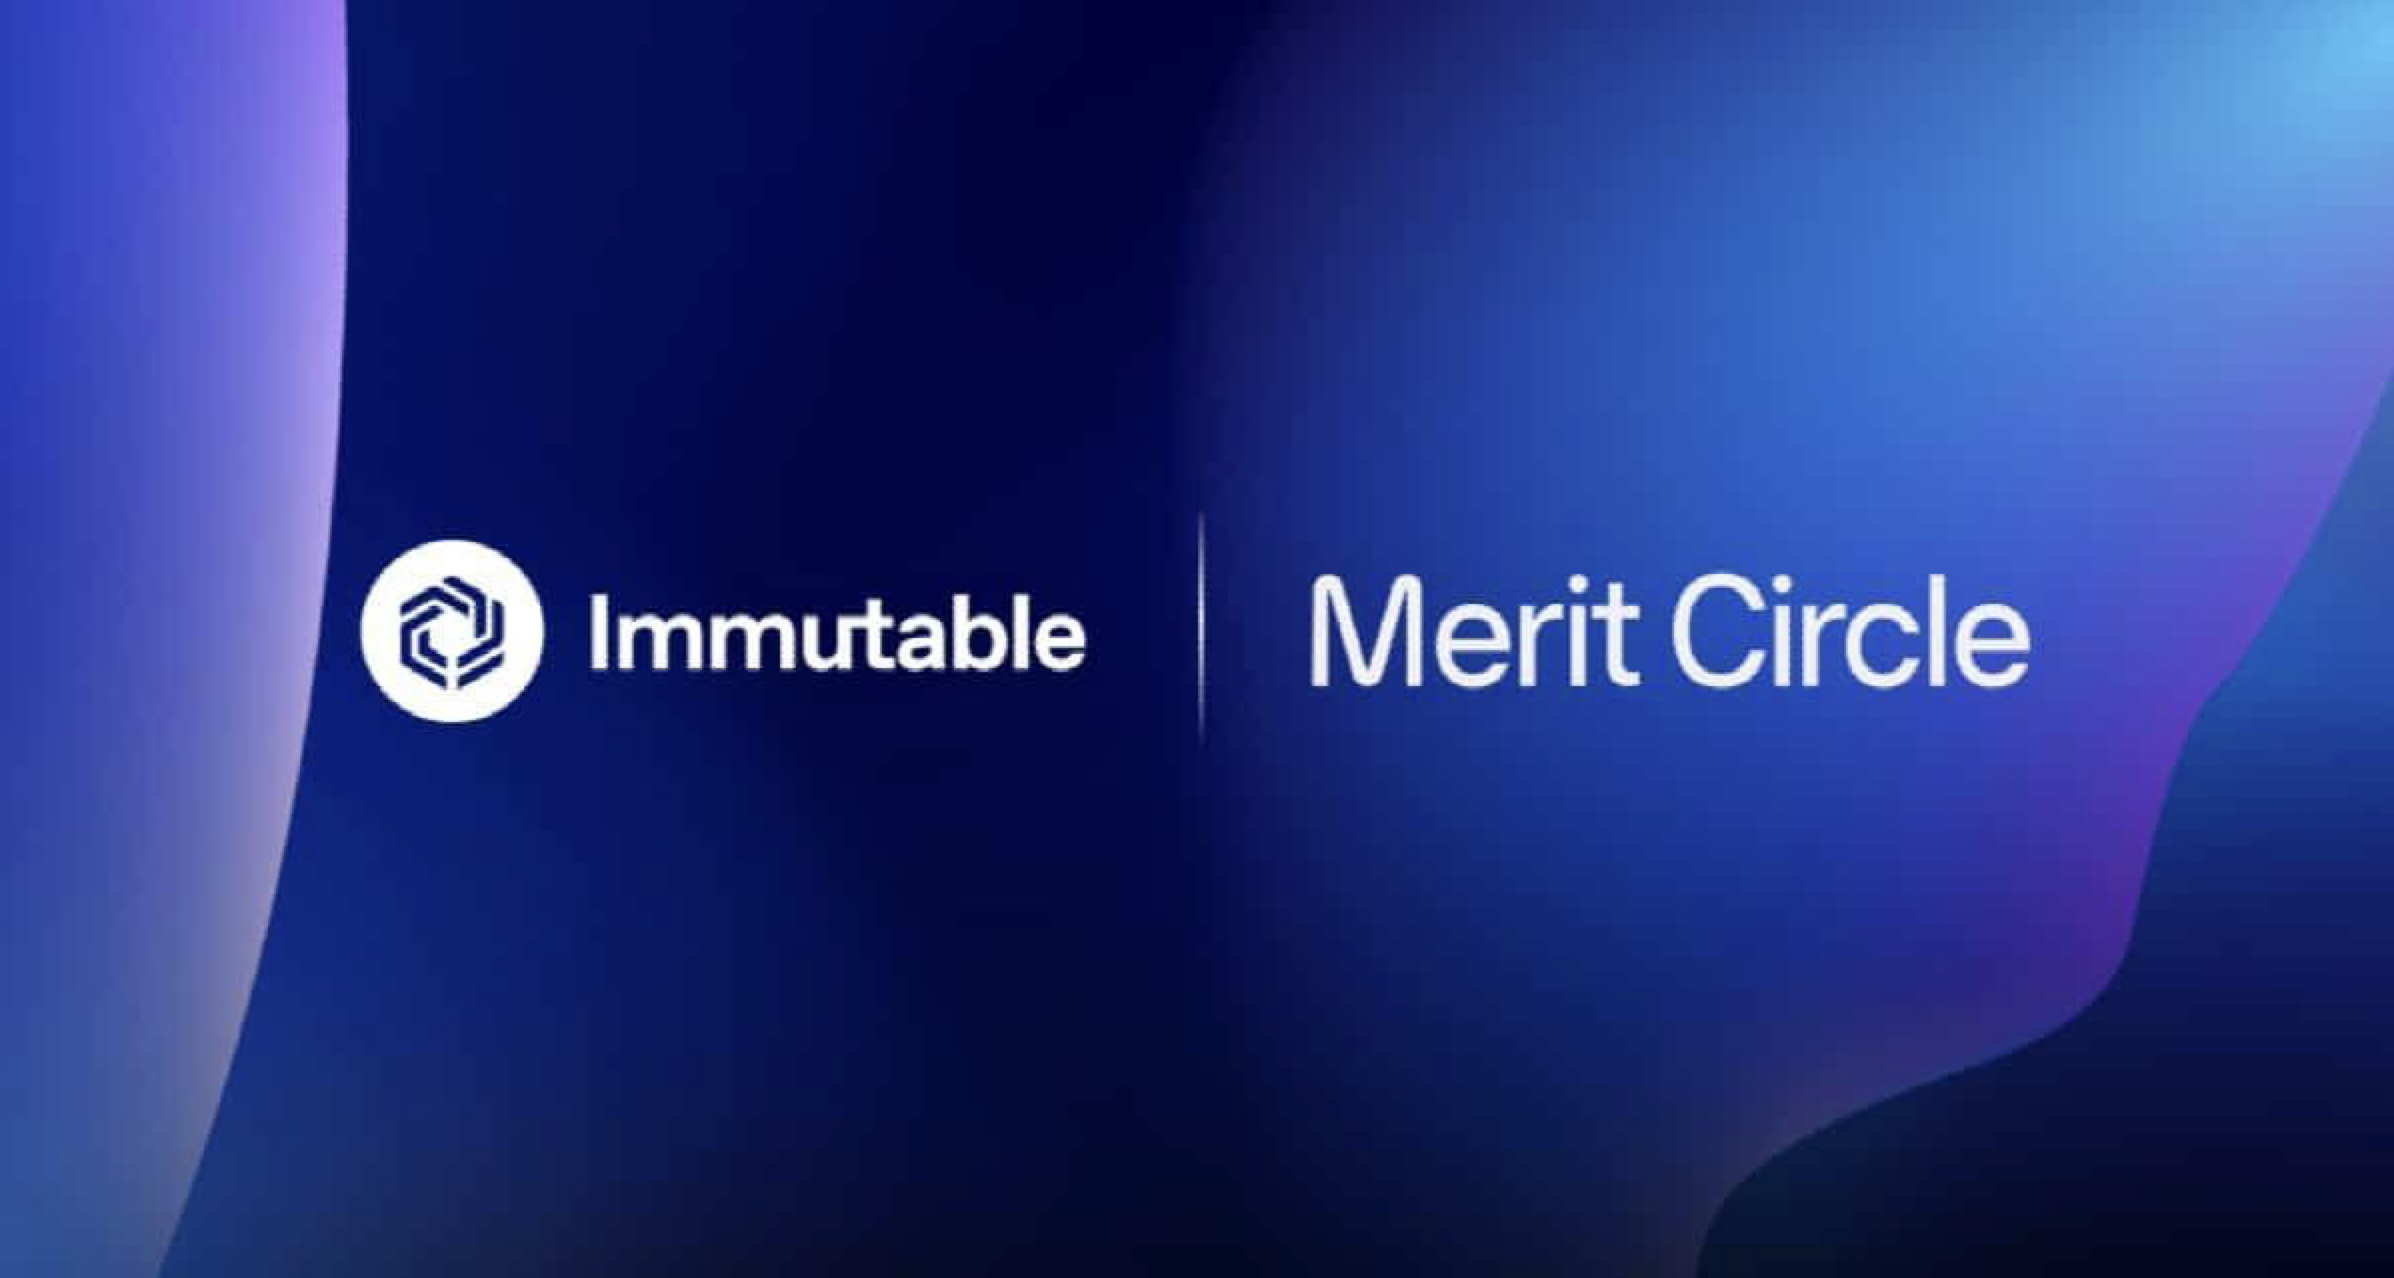 A poster containing logo of Immutable and Merit Circle both